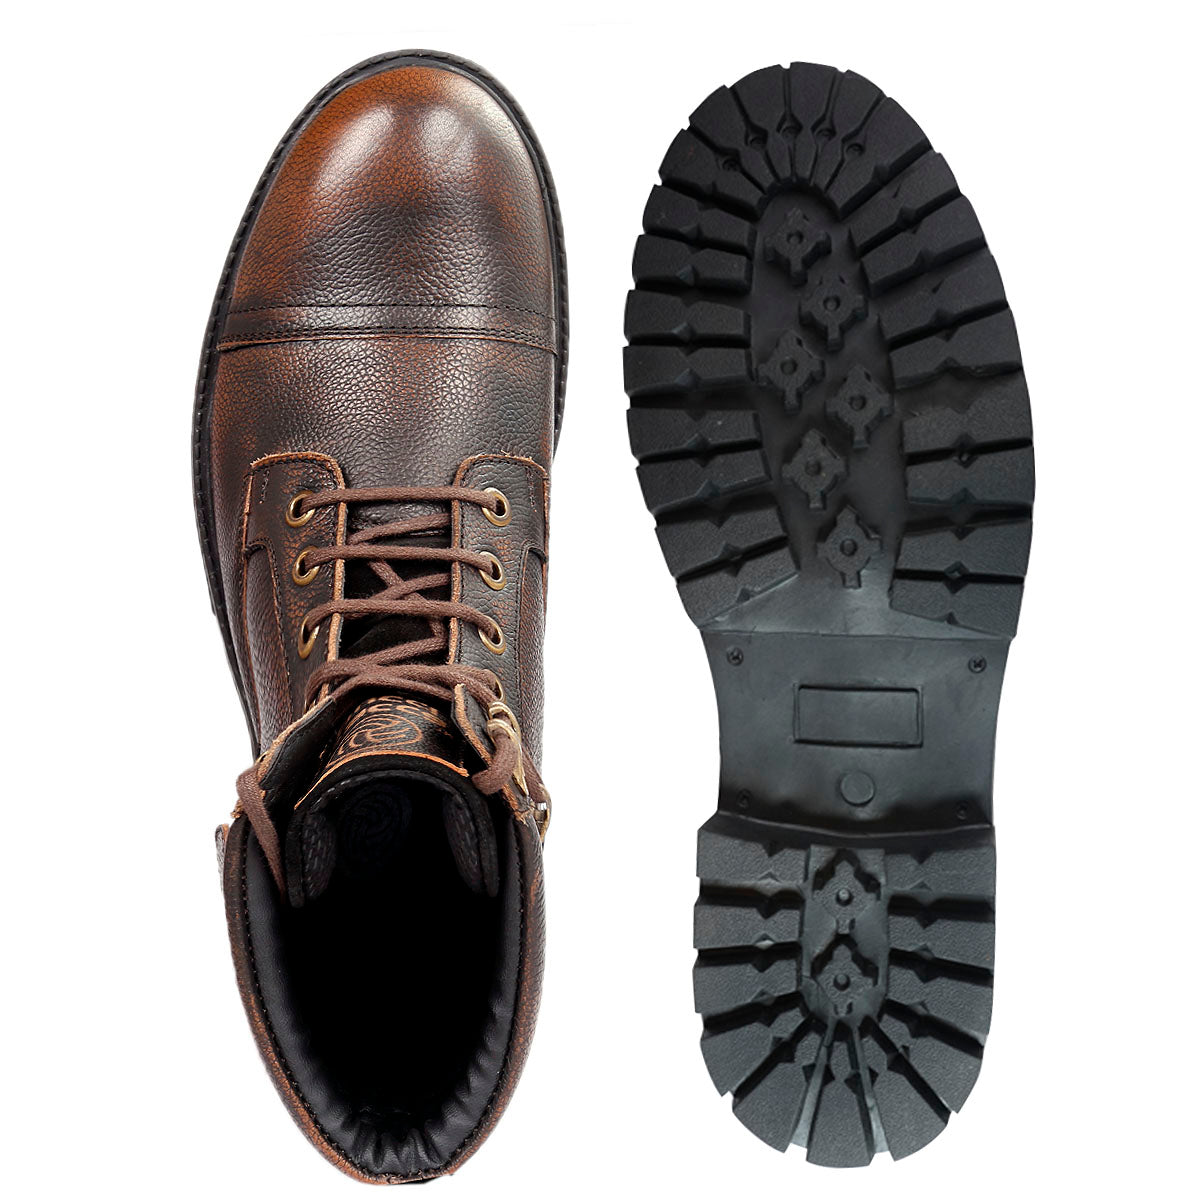 Bacca Bucci Street Fighter Chukka Derby Boots | Genuine Leather Biking Boots for Men